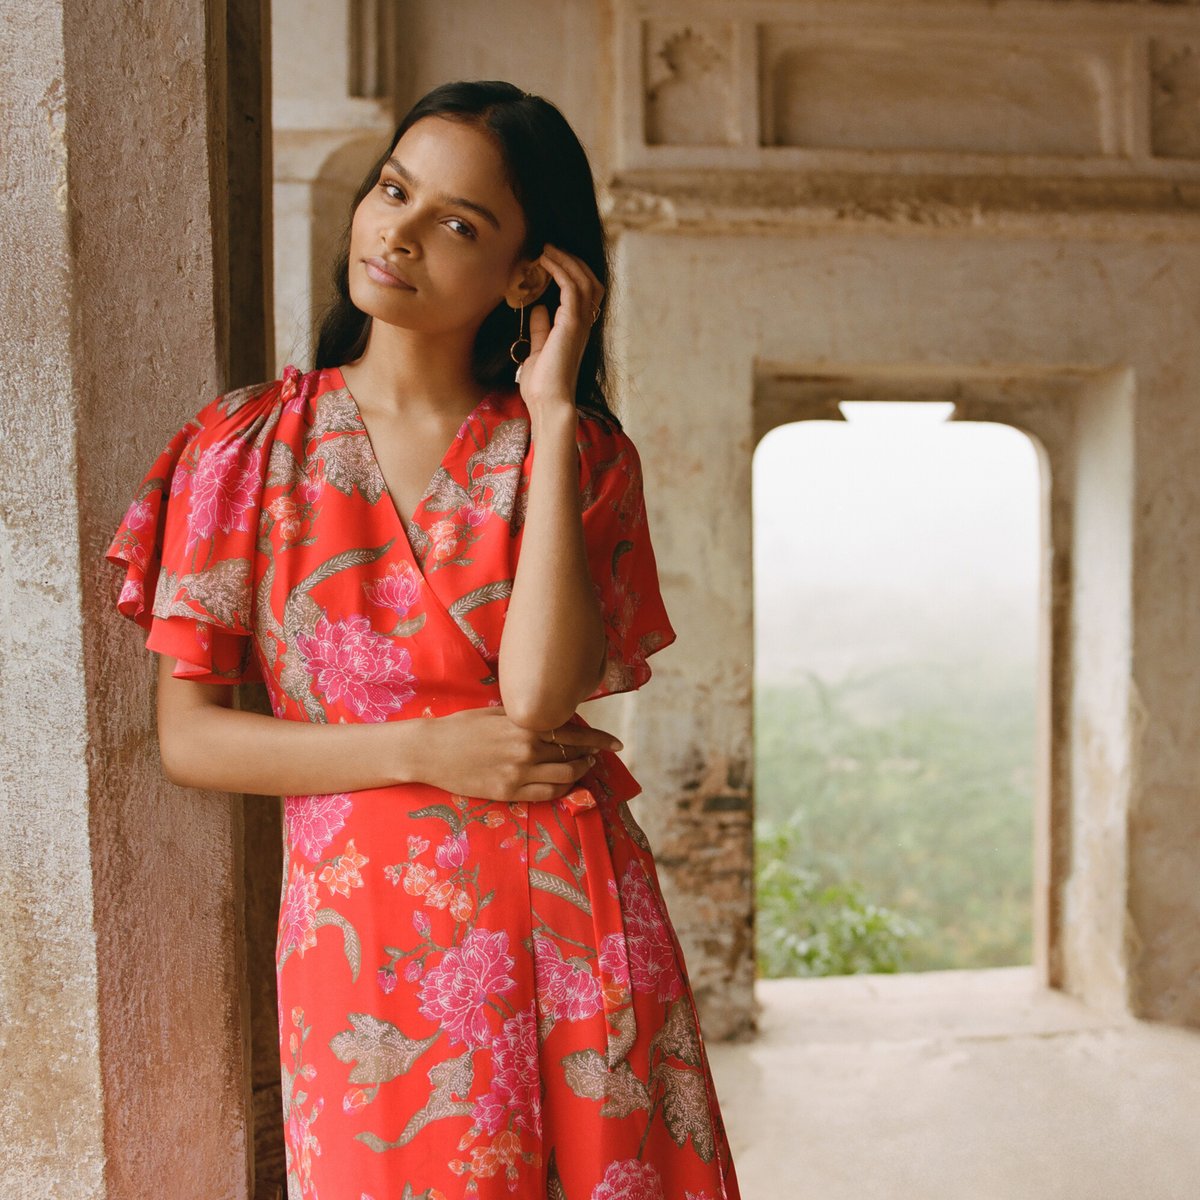 Ethical fashion to brighten up your day. Printed on silk crepe de chine, our Florine dress is a luxurious summertime addition to your wardrobe with fluted sleeves in a flattering wrap silhouette #summer2020 #ethicalfashion